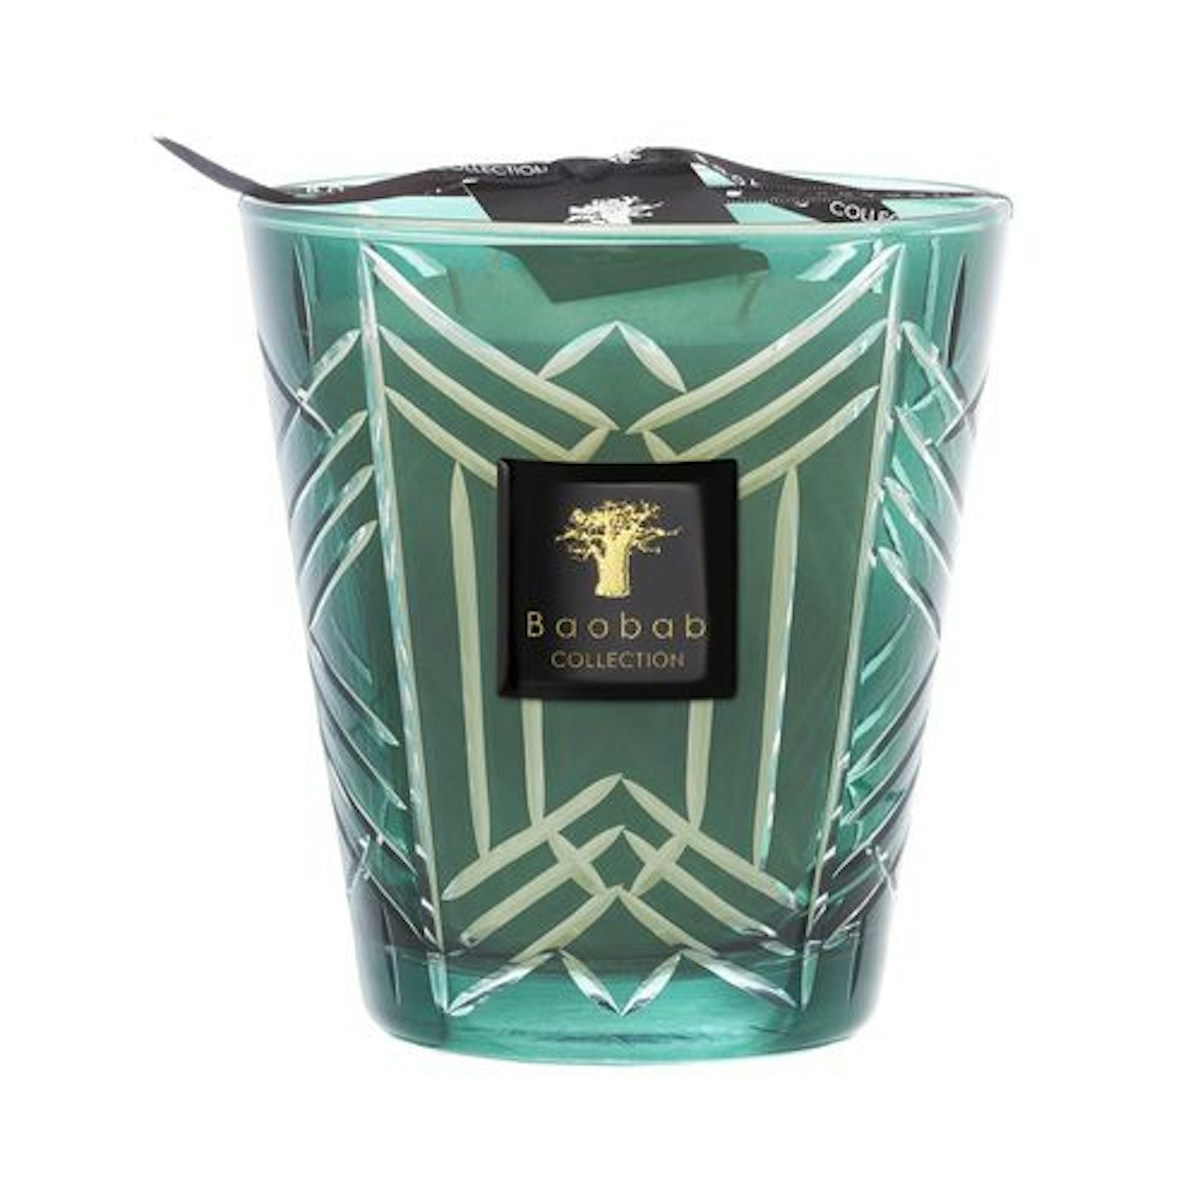 Baobab High Society Candle – Gatsby - 12 Best Scented Candles & Fragrances For Your Home - Style Guide - LuxDeco.com